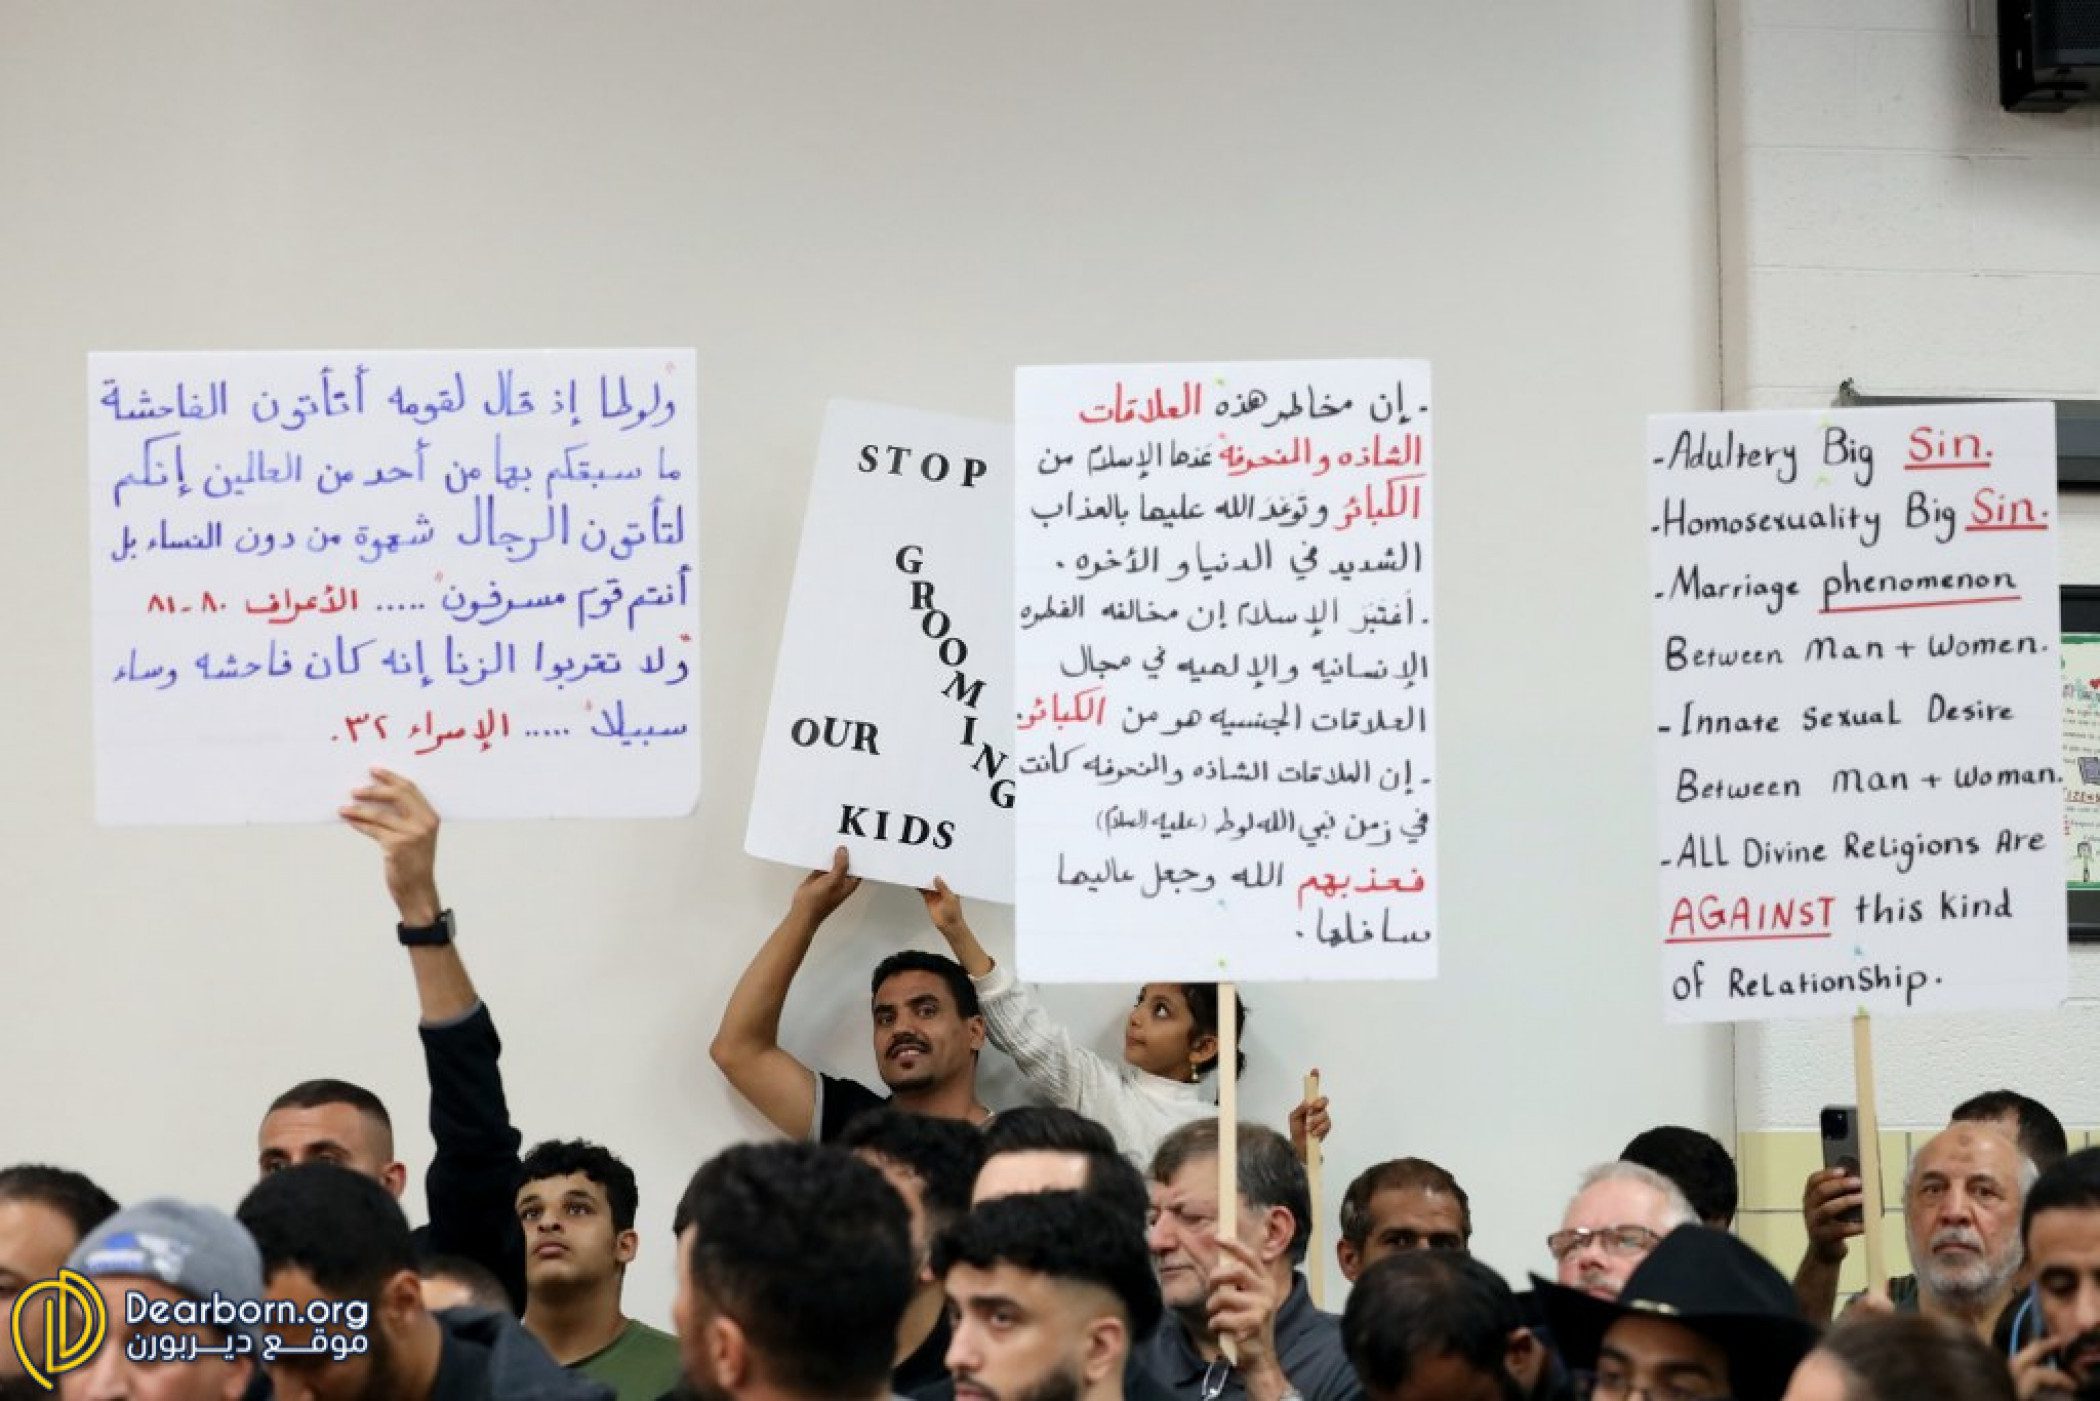 Protestors hold signs at the Dearborn Public Schools Board of Education meeting on Monday, Oct. 10 before it was shutdown by Dearborn Police and Fire, to be reconvened later in the week. Photo: Dearborn.org